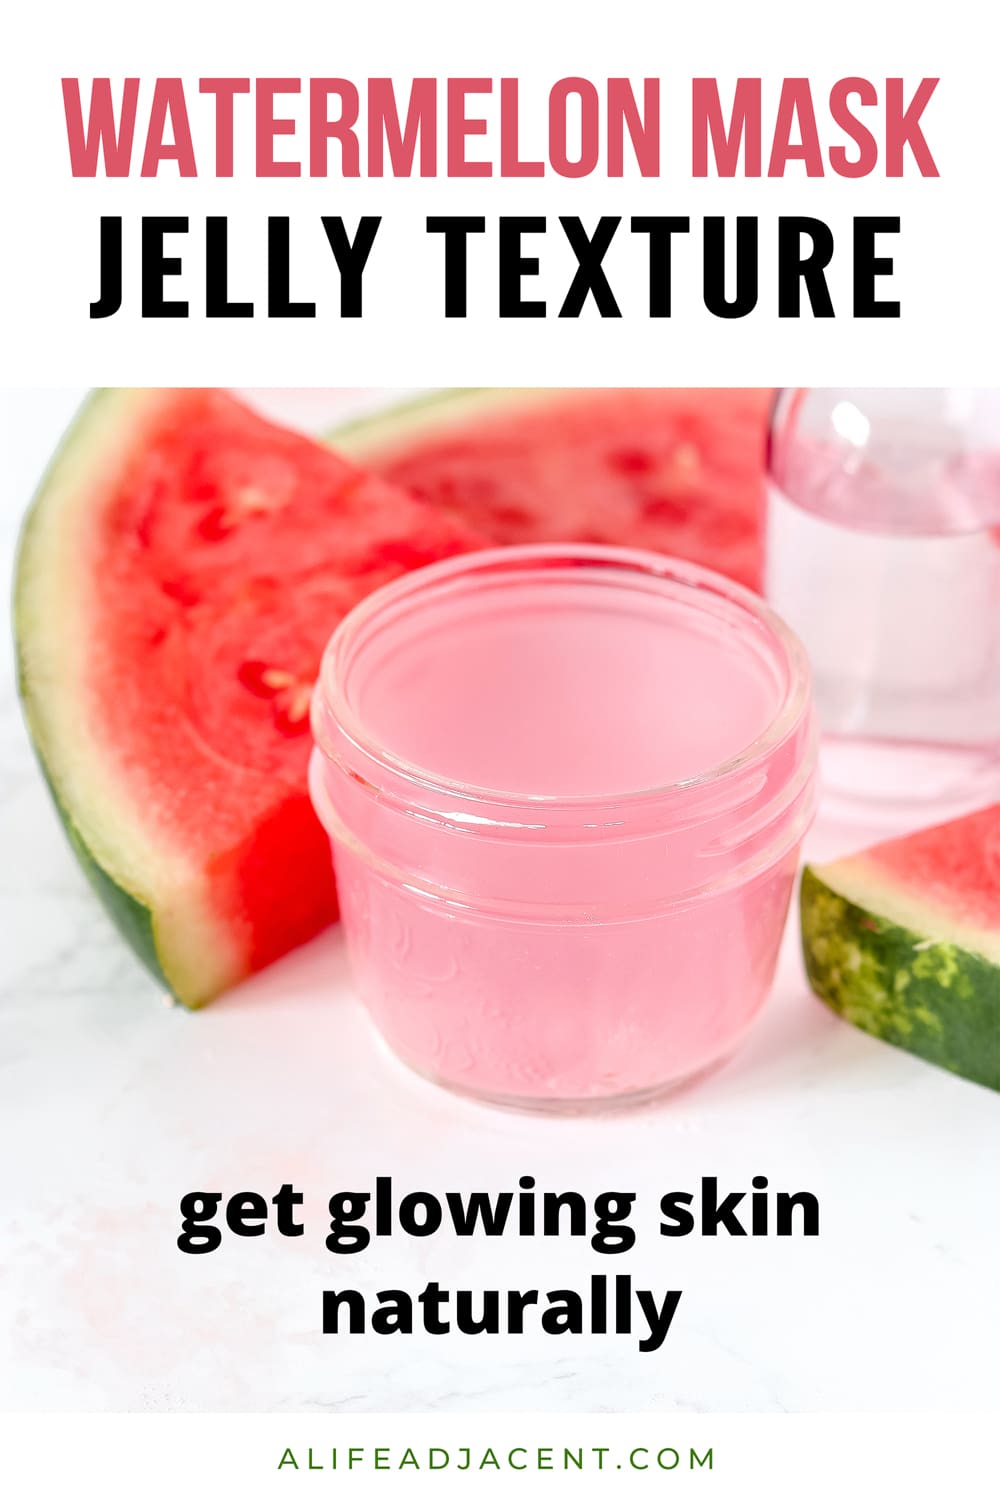 Watermelon jelly mask for glowing skin naturally.